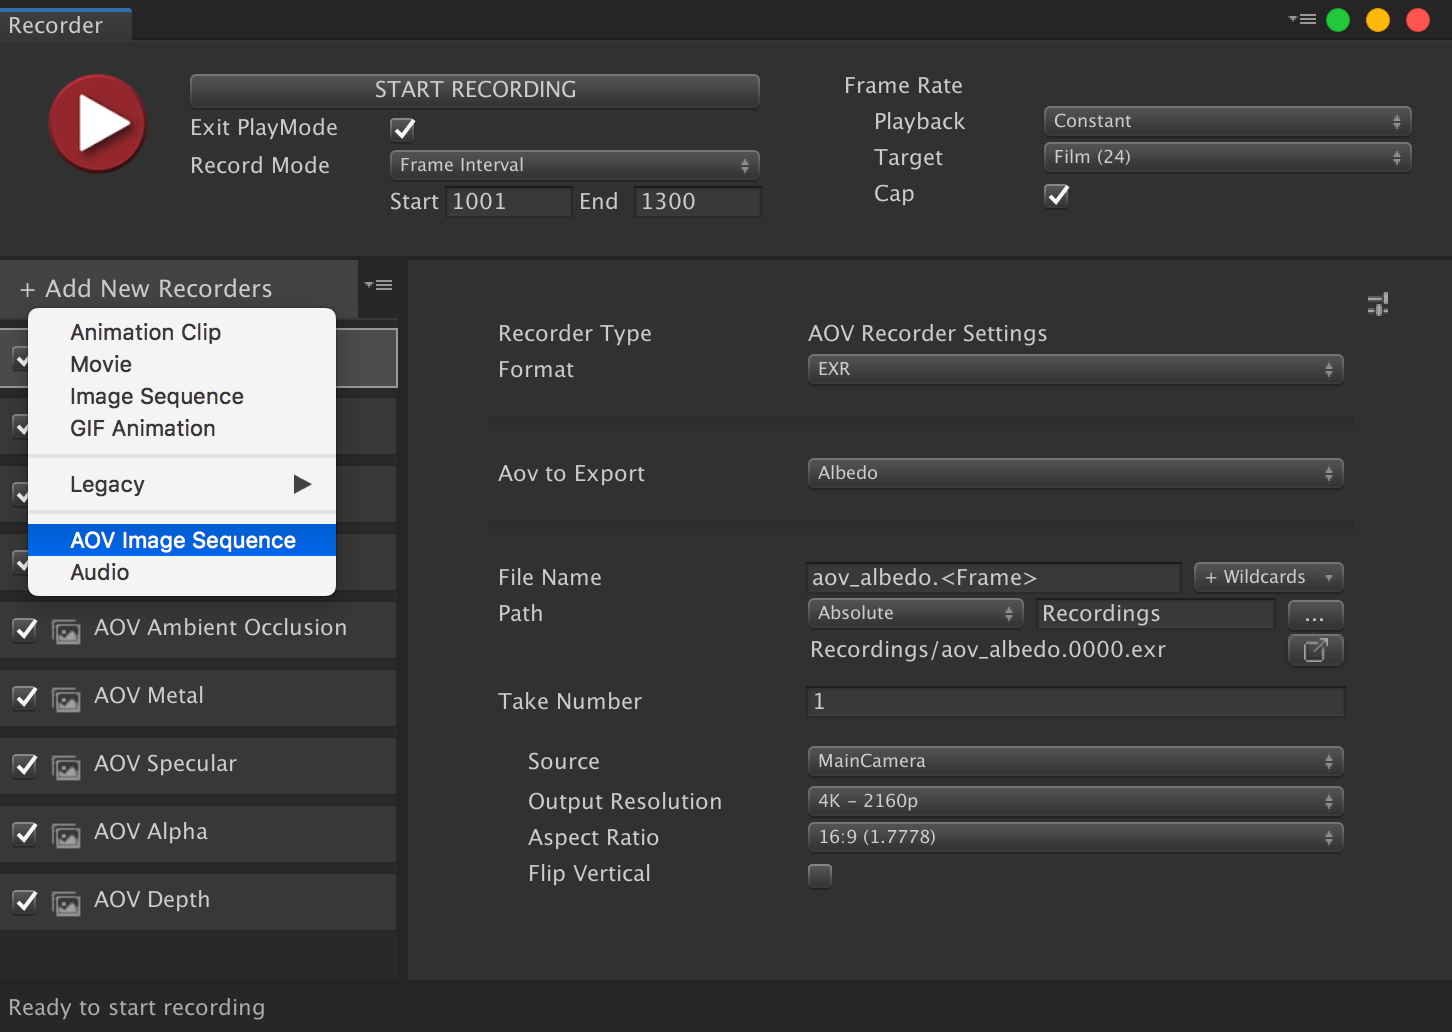 Create an new AOV Image Sequence recorder.